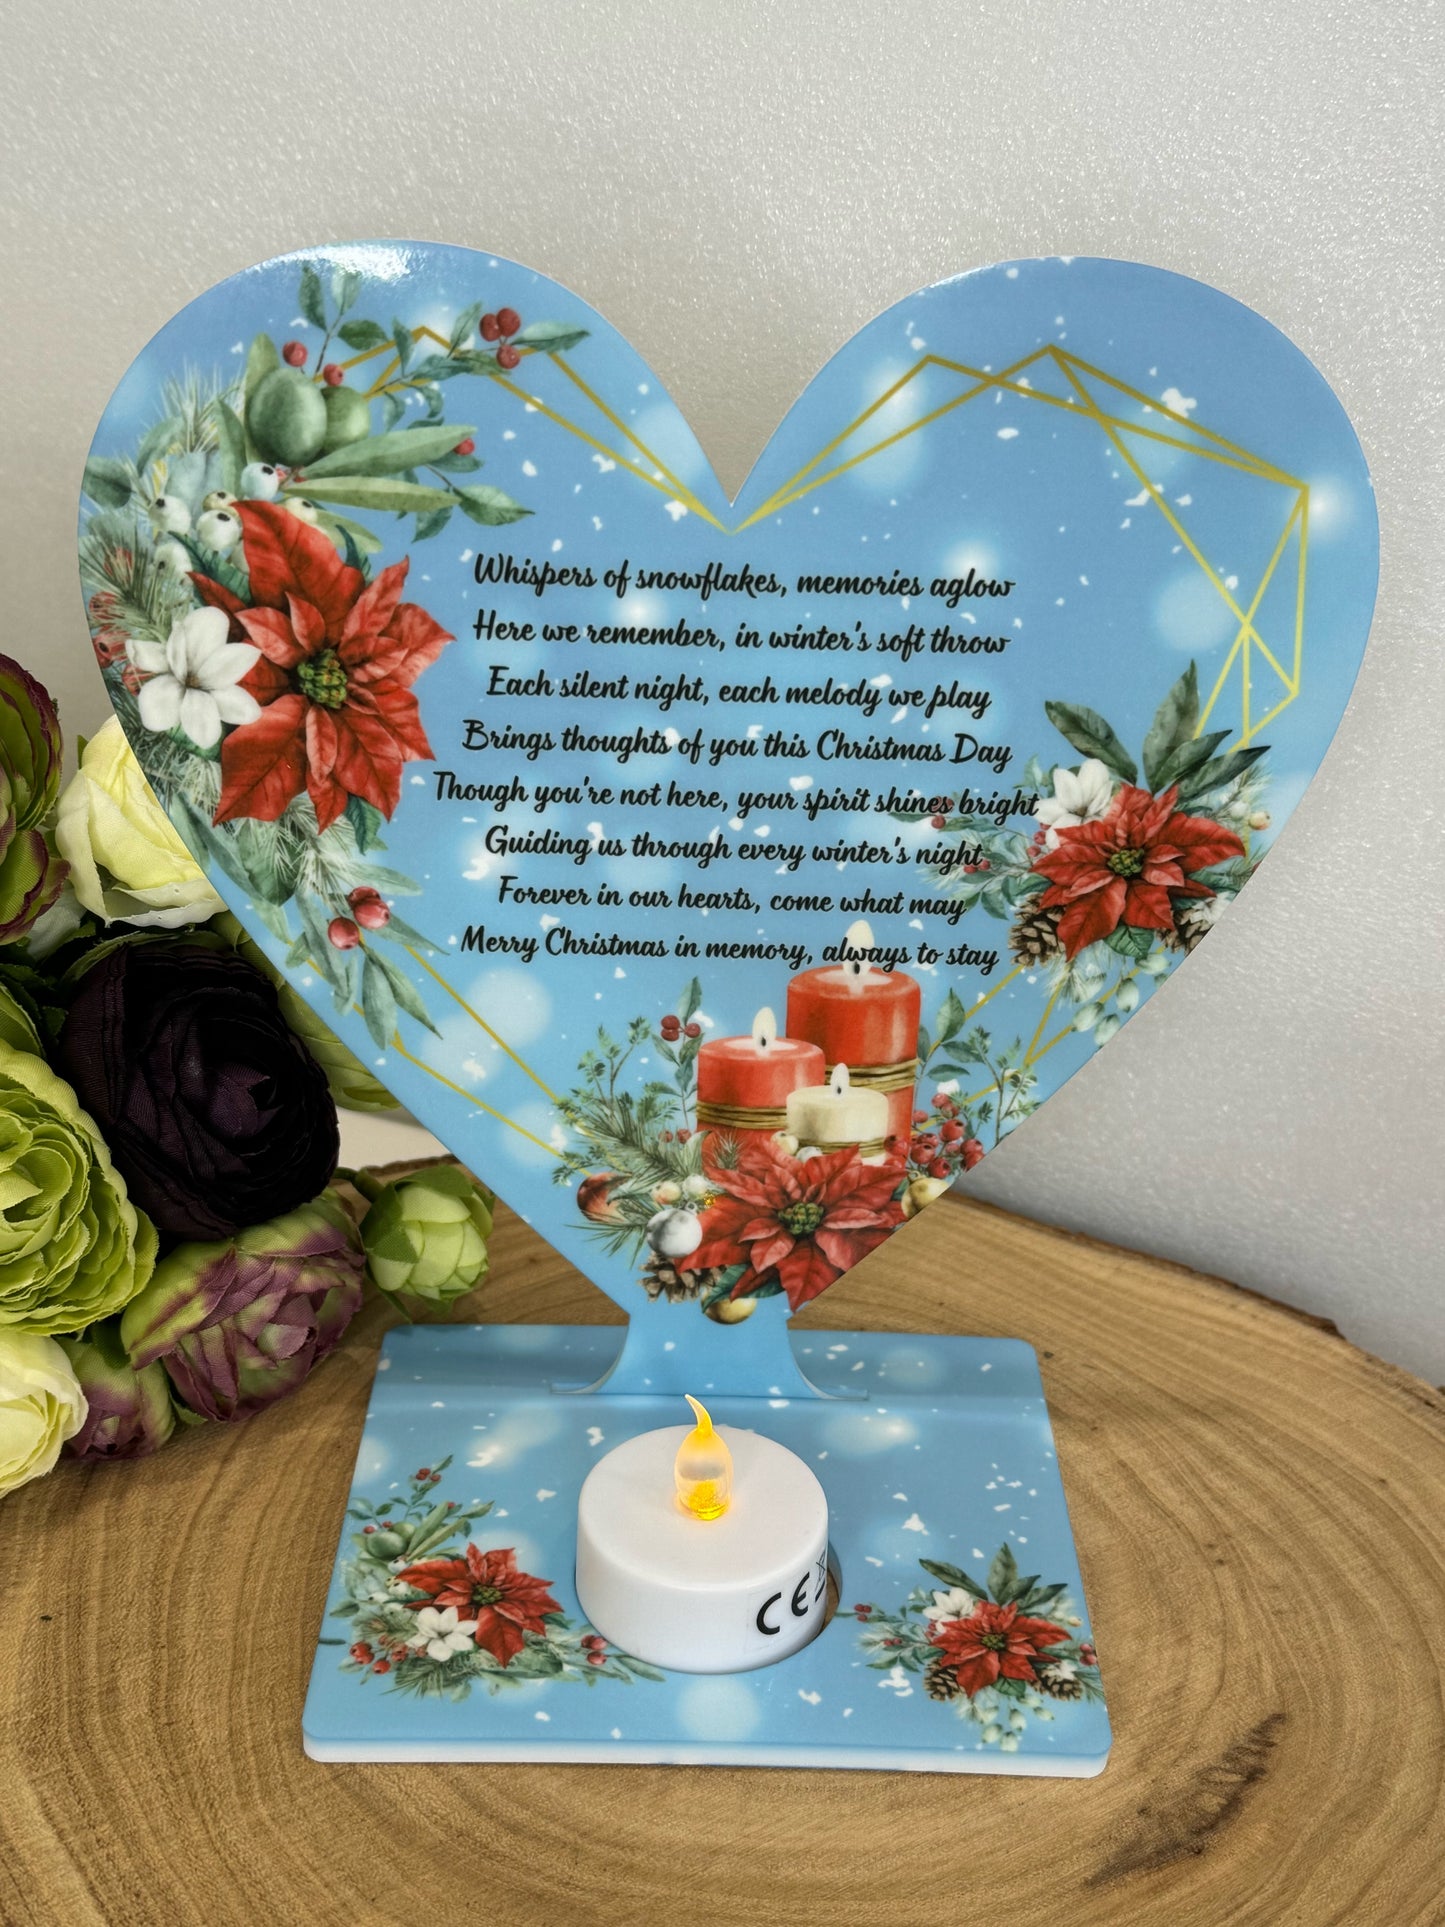 Personalised Christmas Memorial Plaque with a Picture to Remember a Loved One, Tea Light Holder